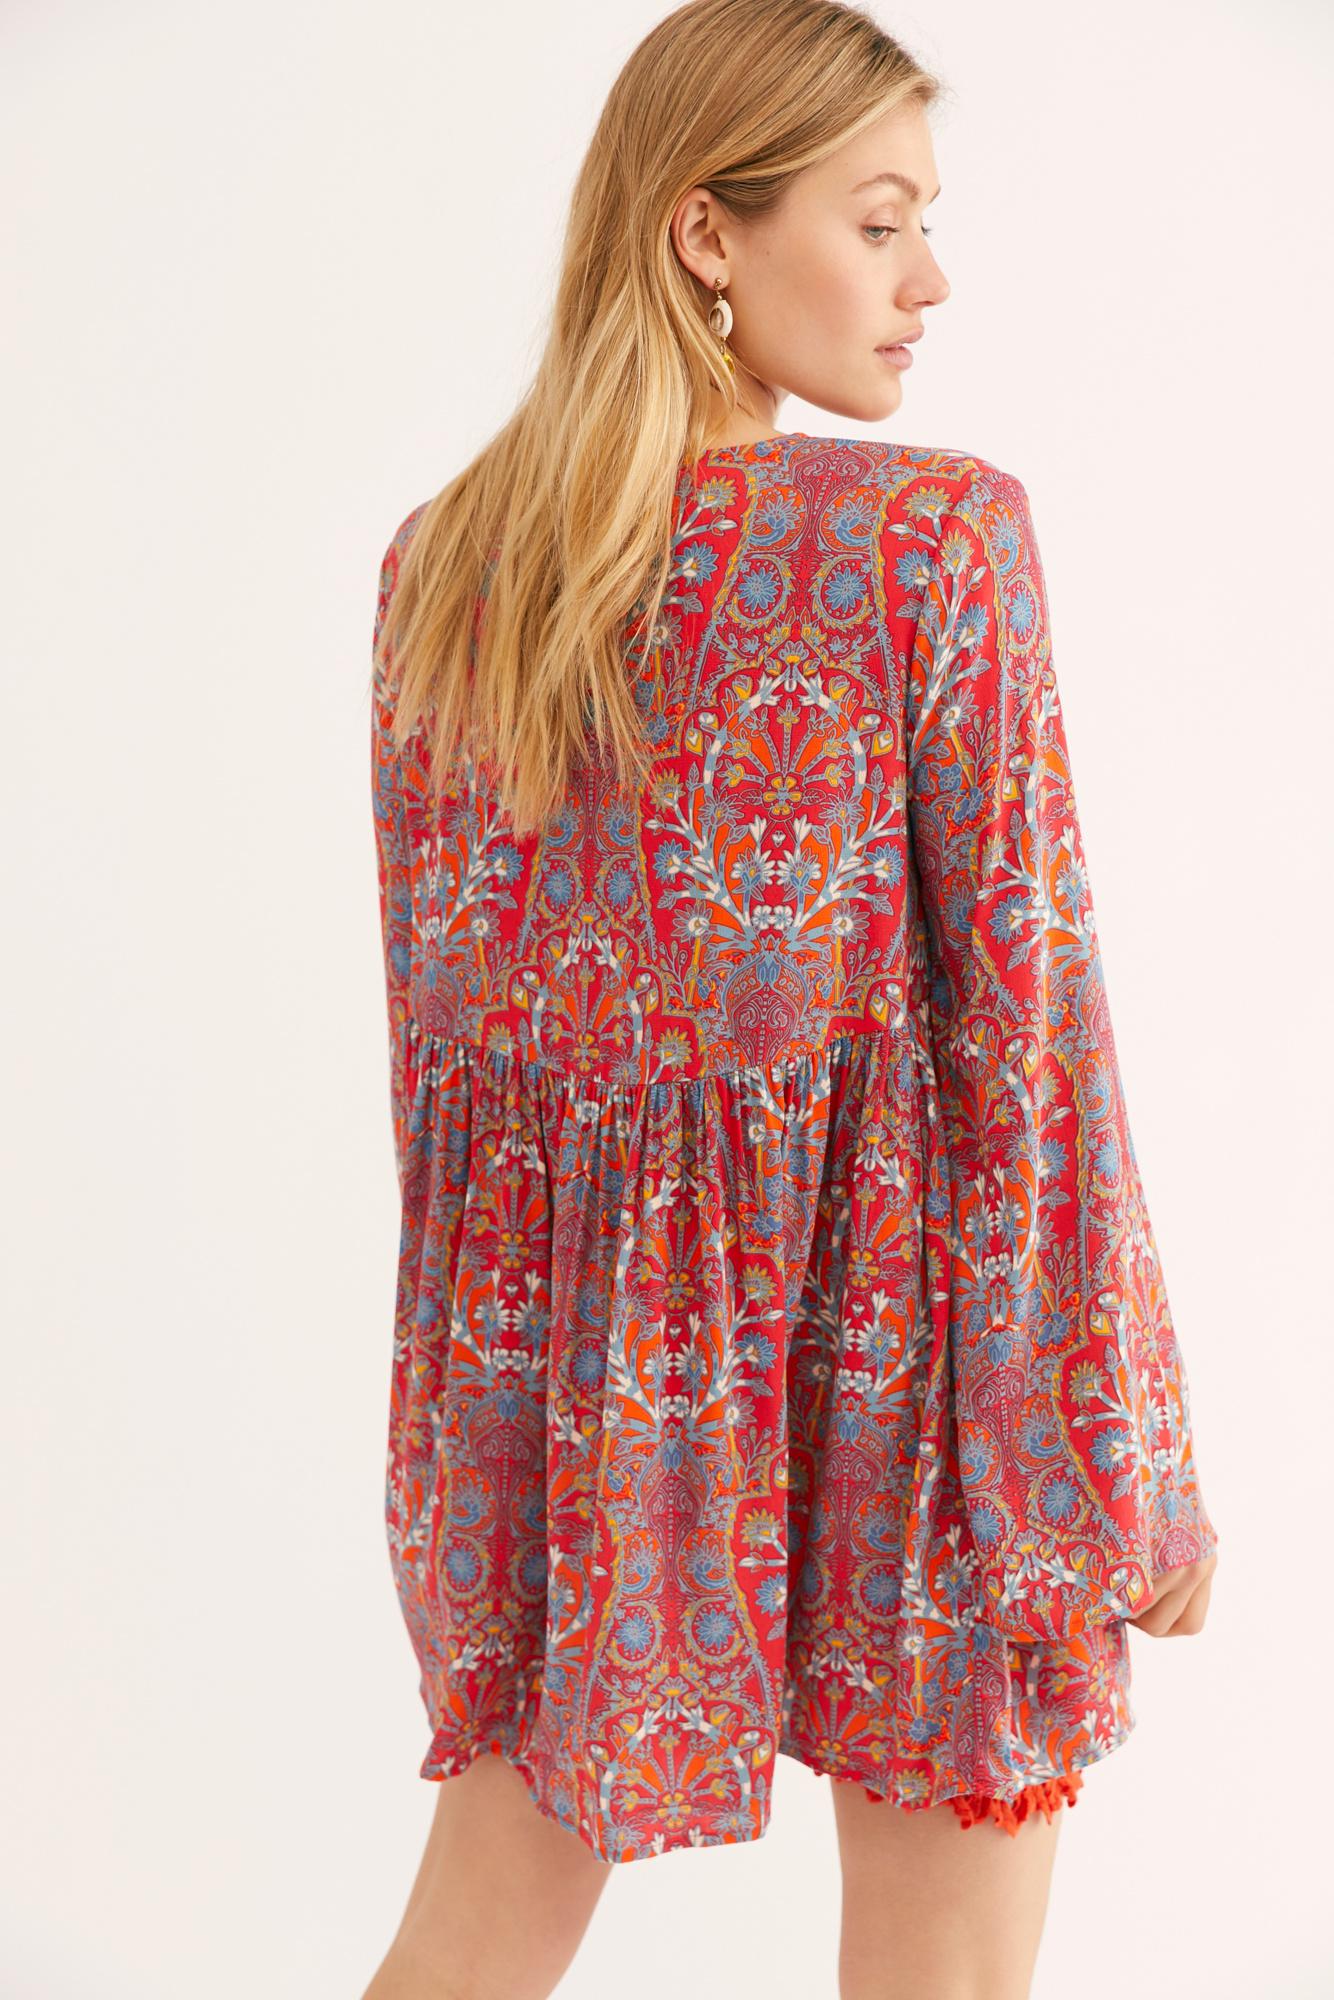 Free People Bella Printed Tunic in Cherry Combo (Red) - Lyst